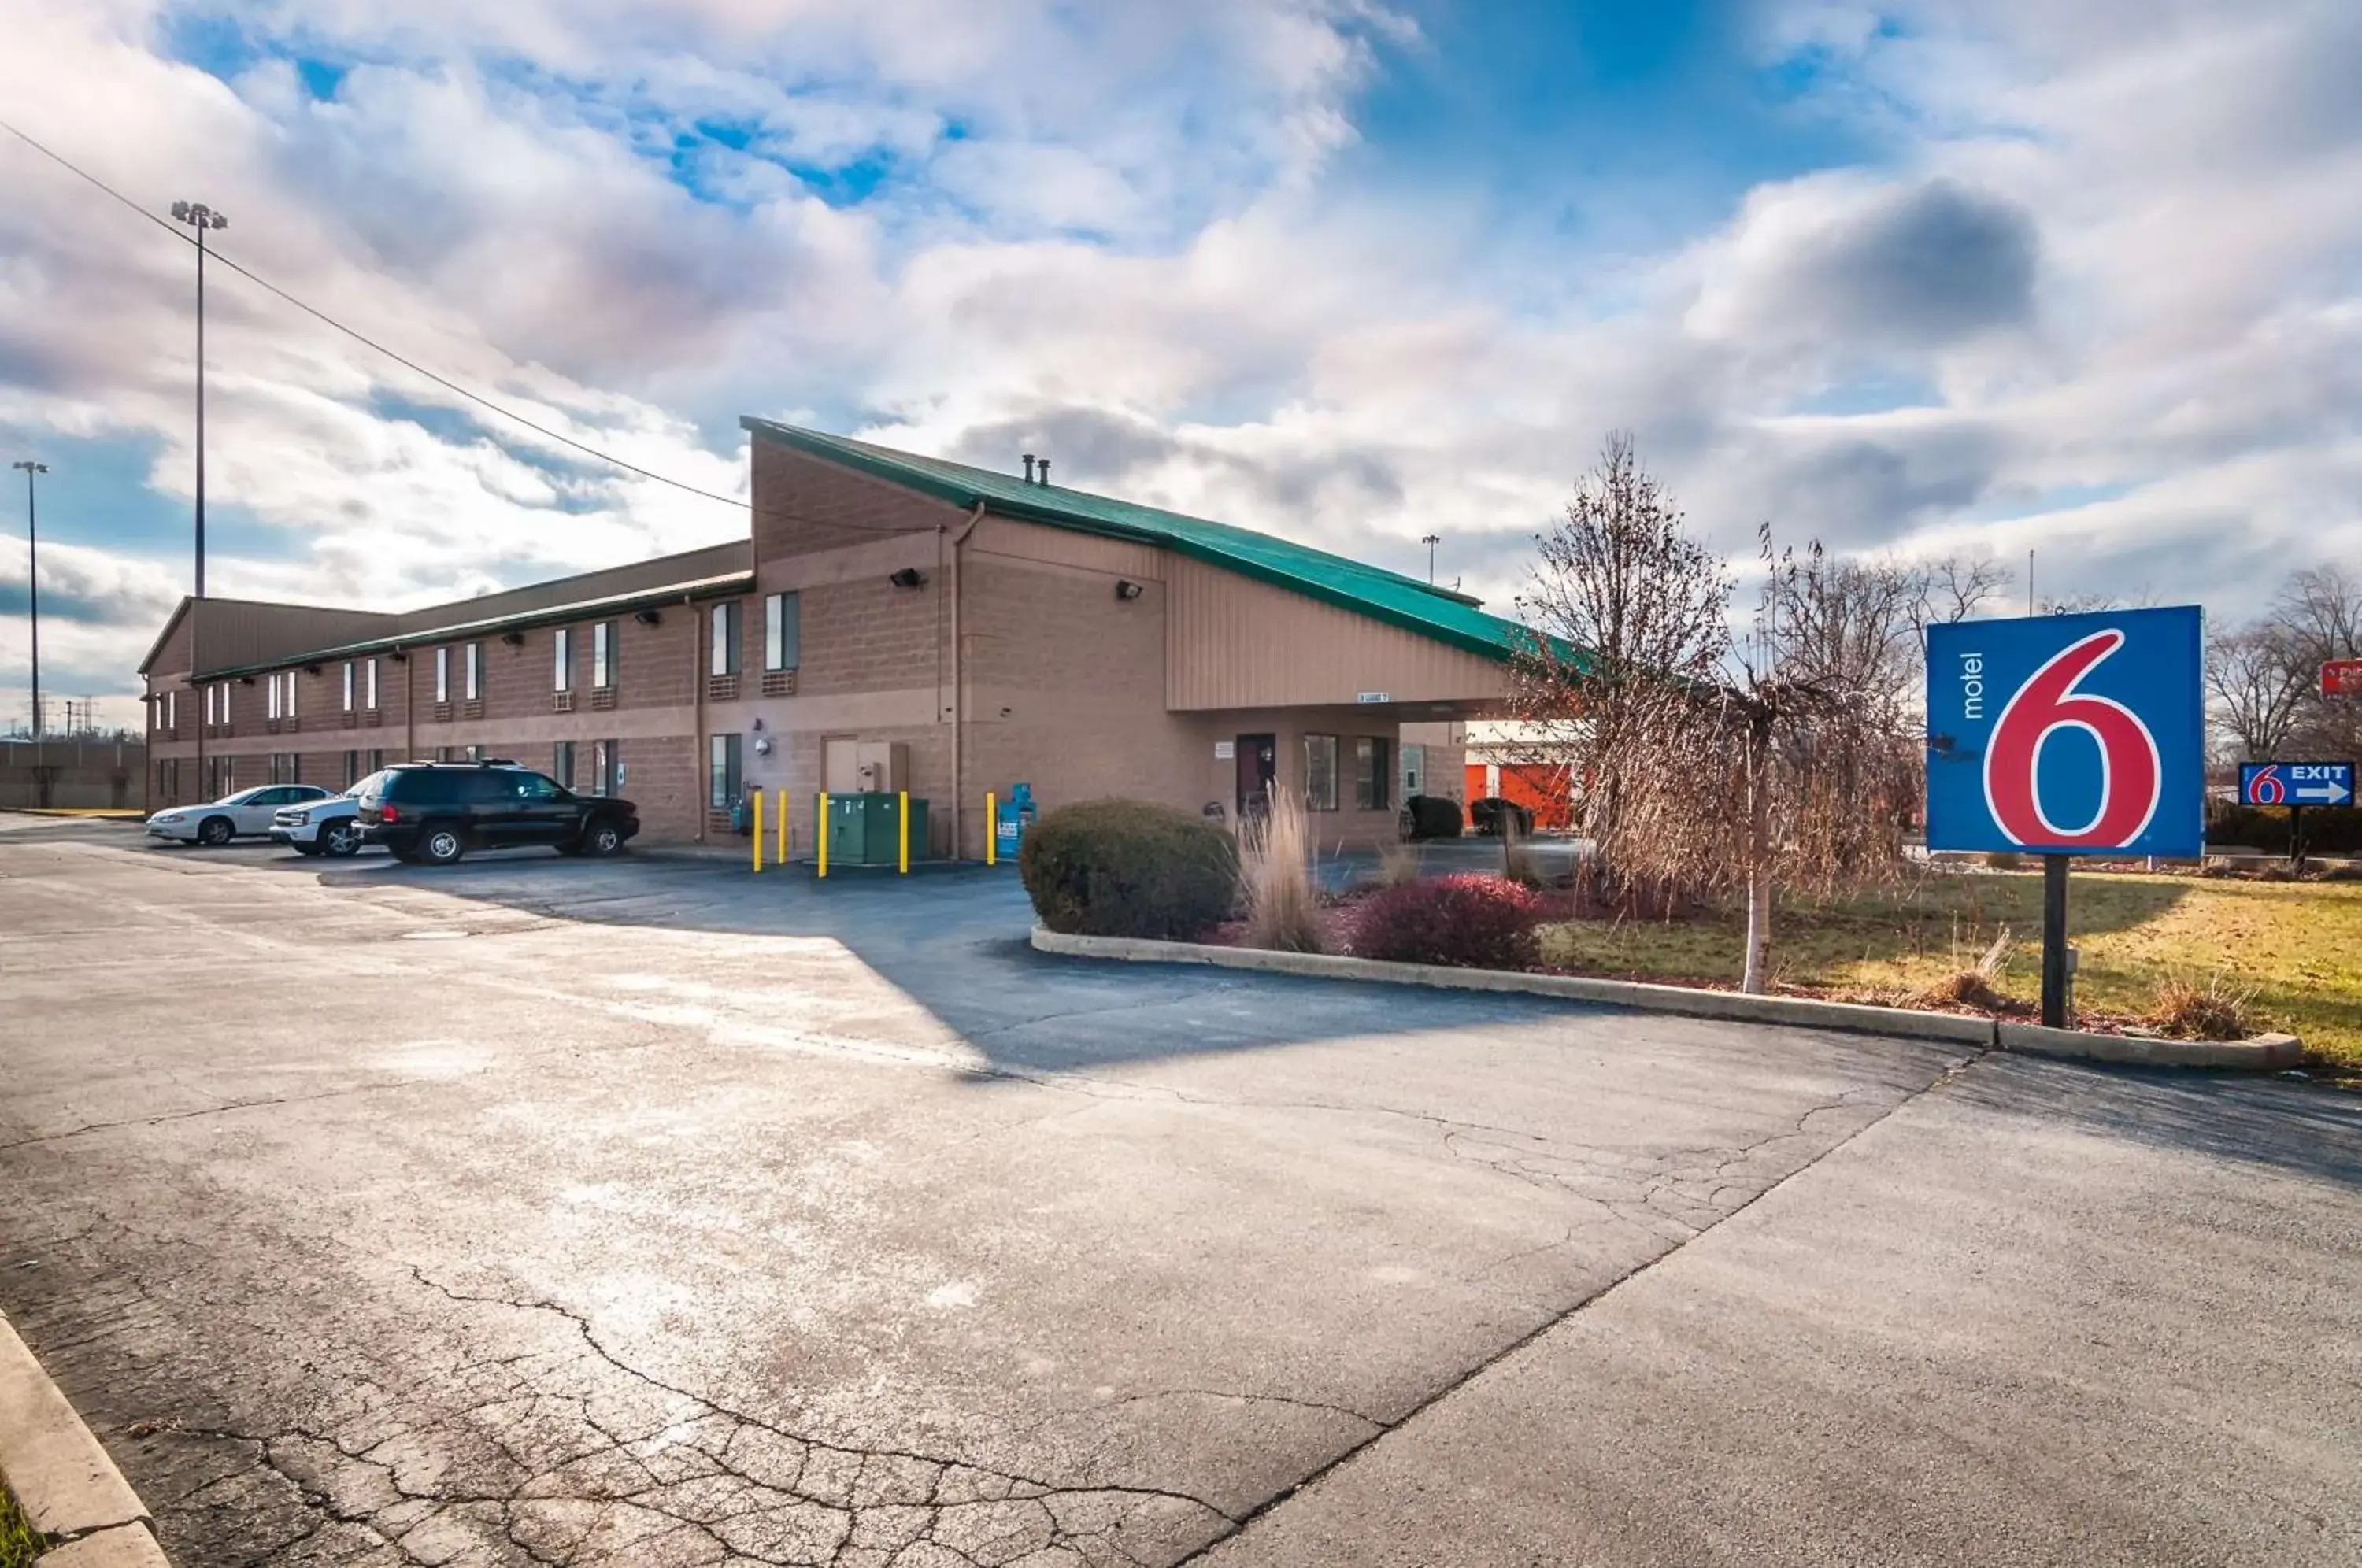 Property building in Motel 6-Lansing, IL - Chicago South